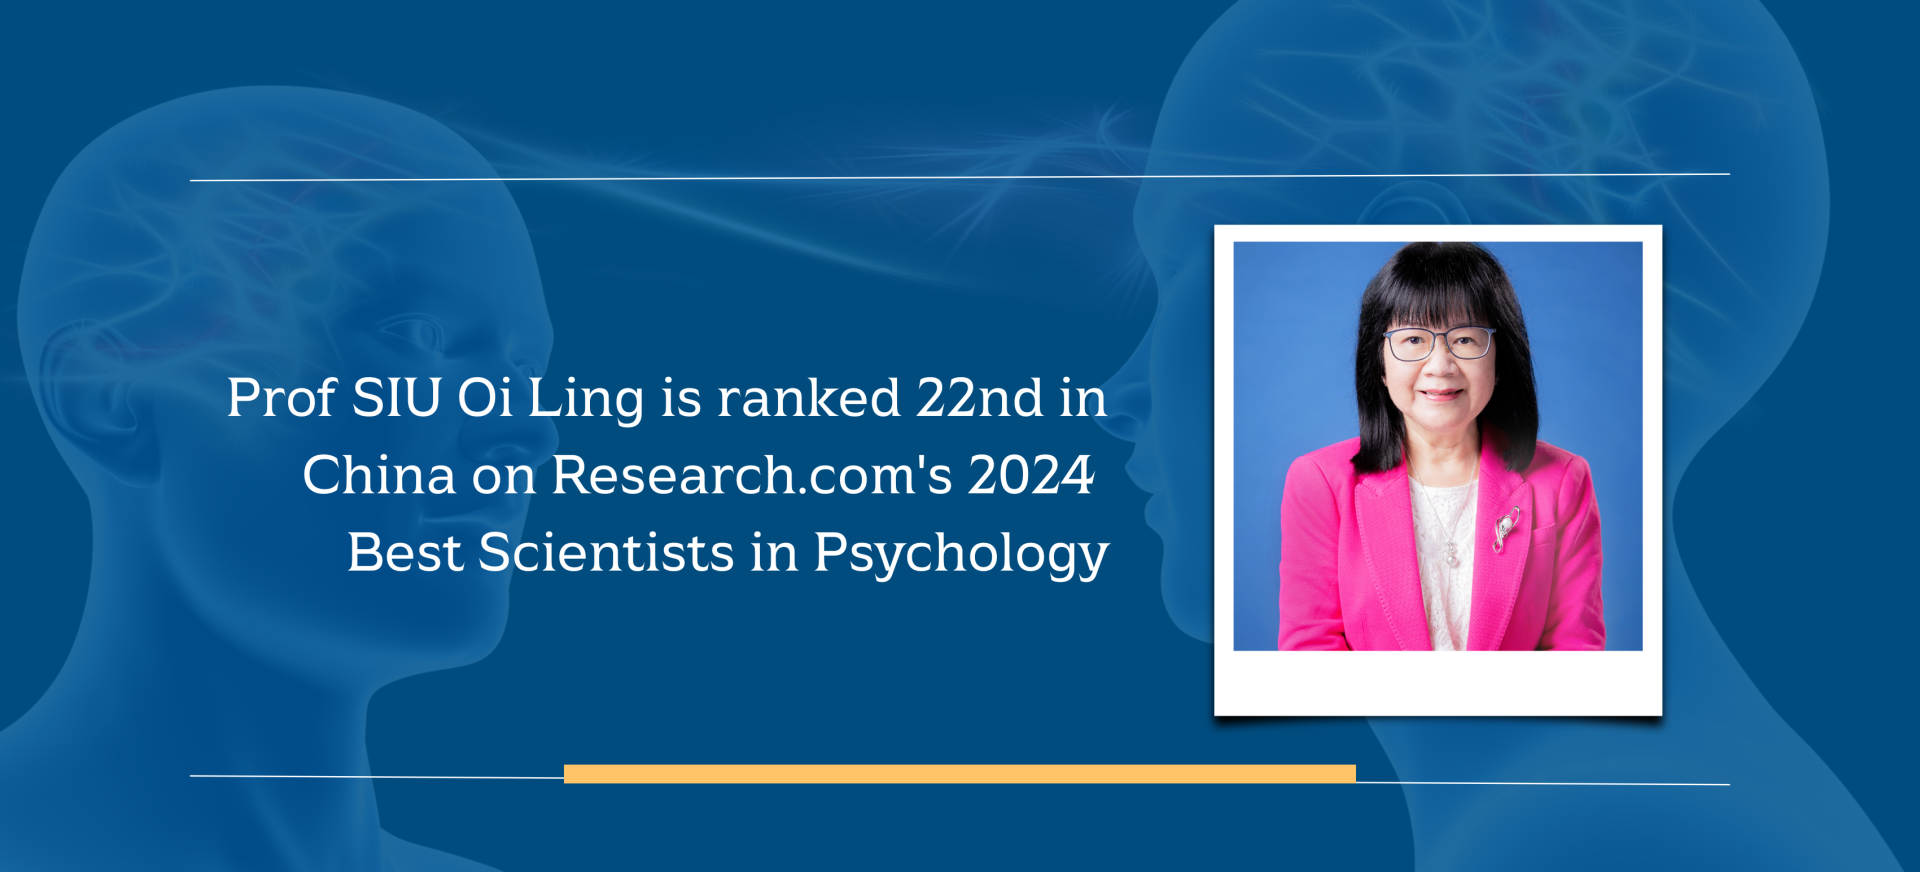 Prof SIU Oi Ling is ranked 22nd in China on Research.com's 2024 Best Scientists in Psychology